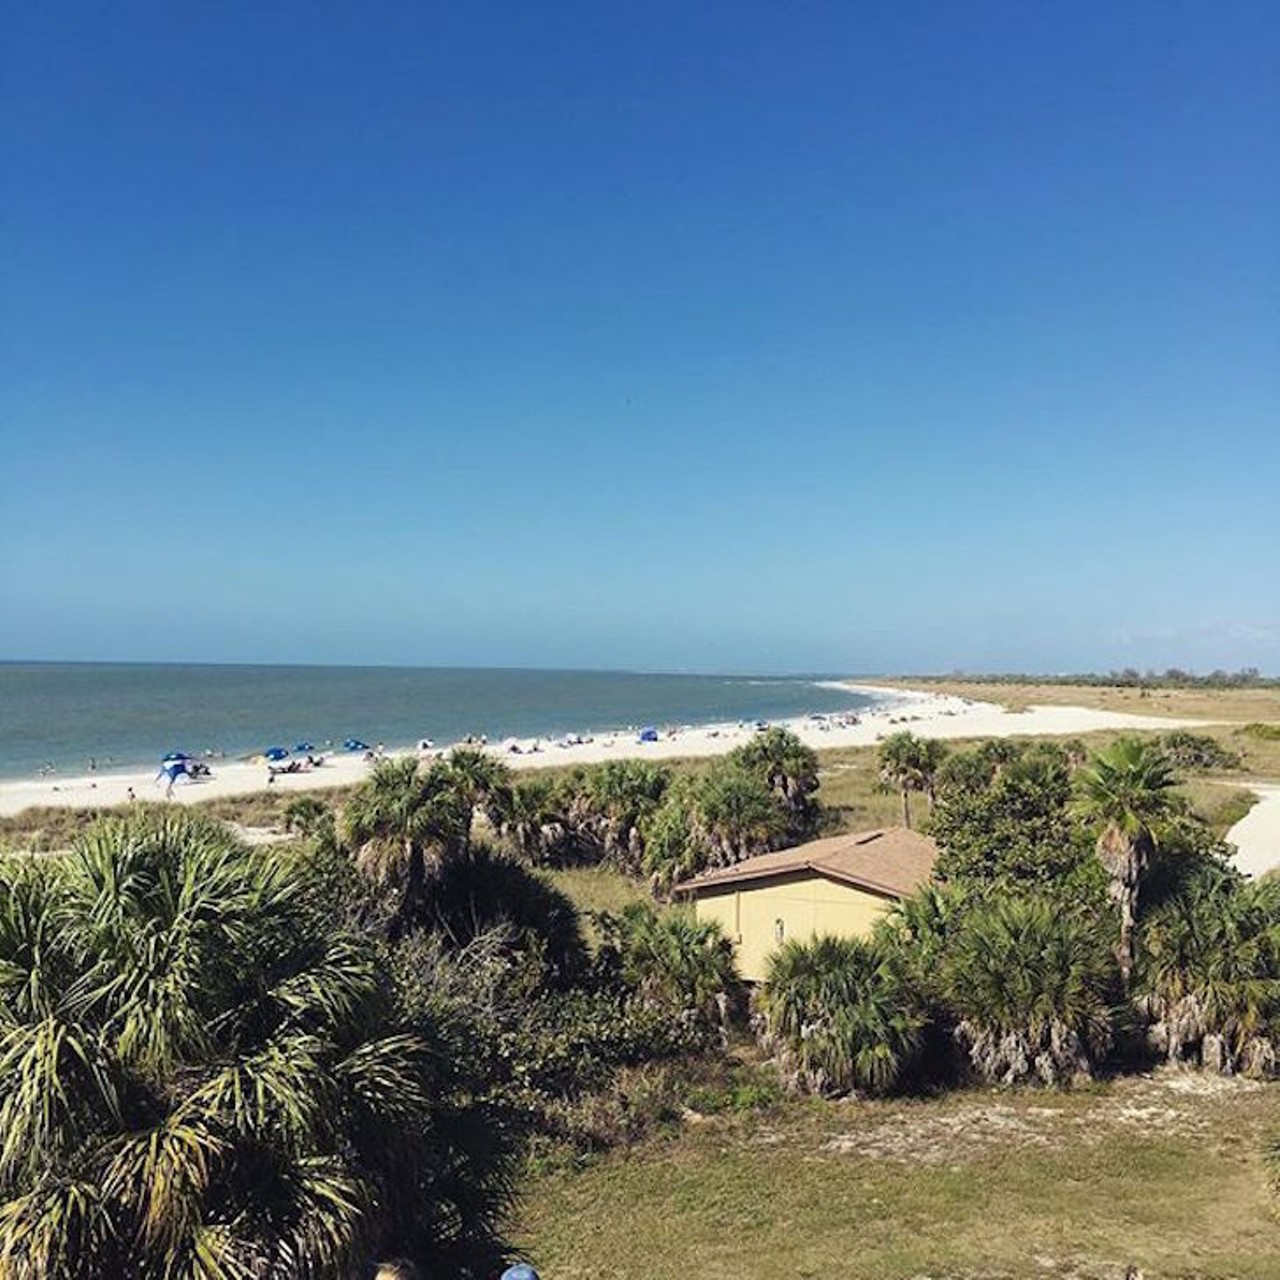 Fort De Soto Park
3500 Pinellas Bayway S., Tierra Verde, Fla. 33715 | 727-582-2267
Remember all those music videos you used to watch that showed people having fun around a campfire on the beach? That could be your reality if you choose to camp at Fort De Soto Park. With palm trees every which way, you get the beach feel with the seclusion of camp life.
Photo via ptilb on Instagram